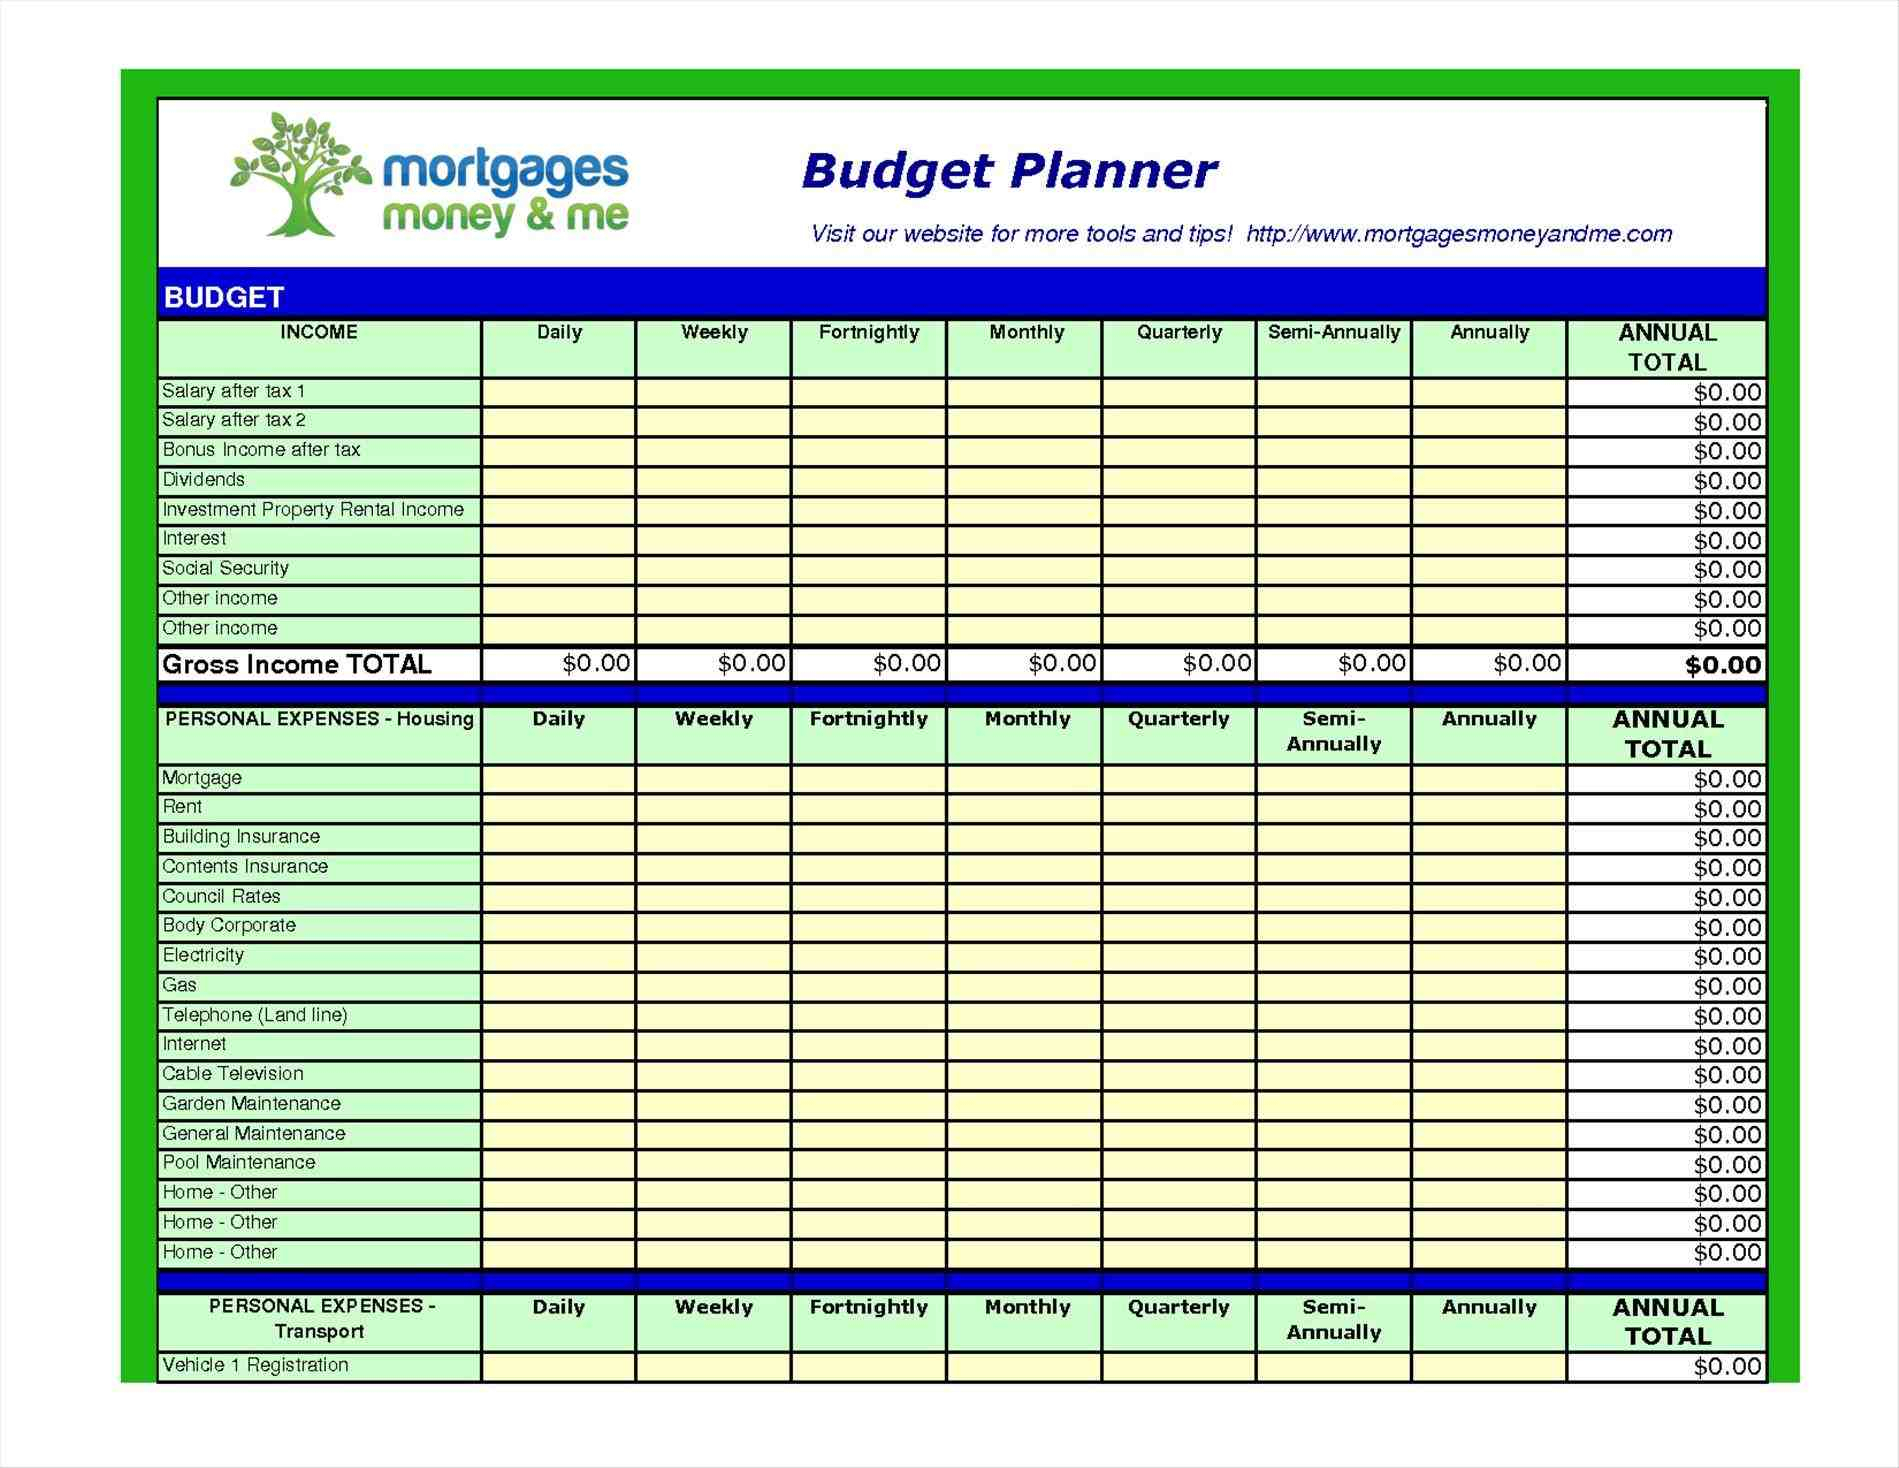 monthly-budget-planner-form-download-free-template-8-daily-budget